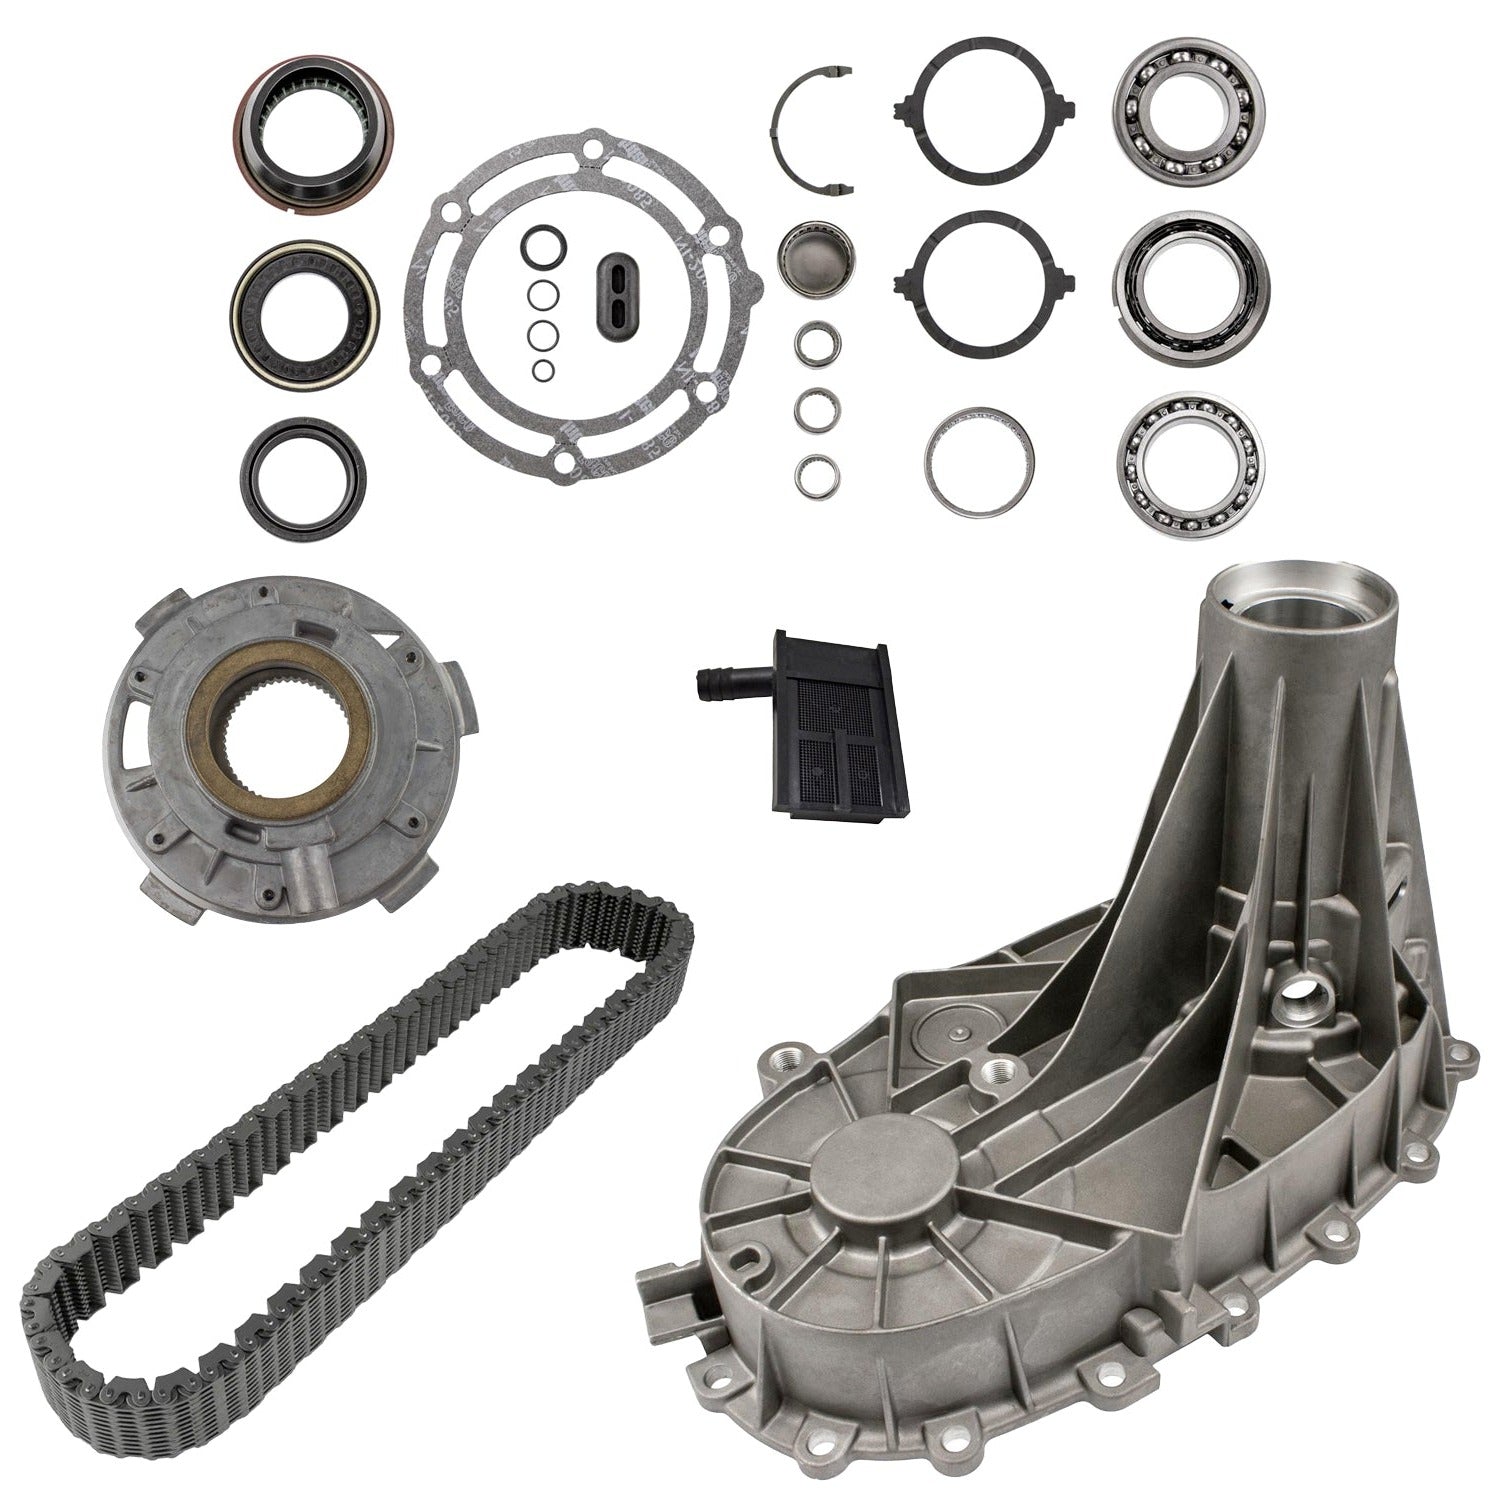 NP263XHD Transtar Transfer Case Rebuild Kit w/ Bearings Gaskets Seals and Chain